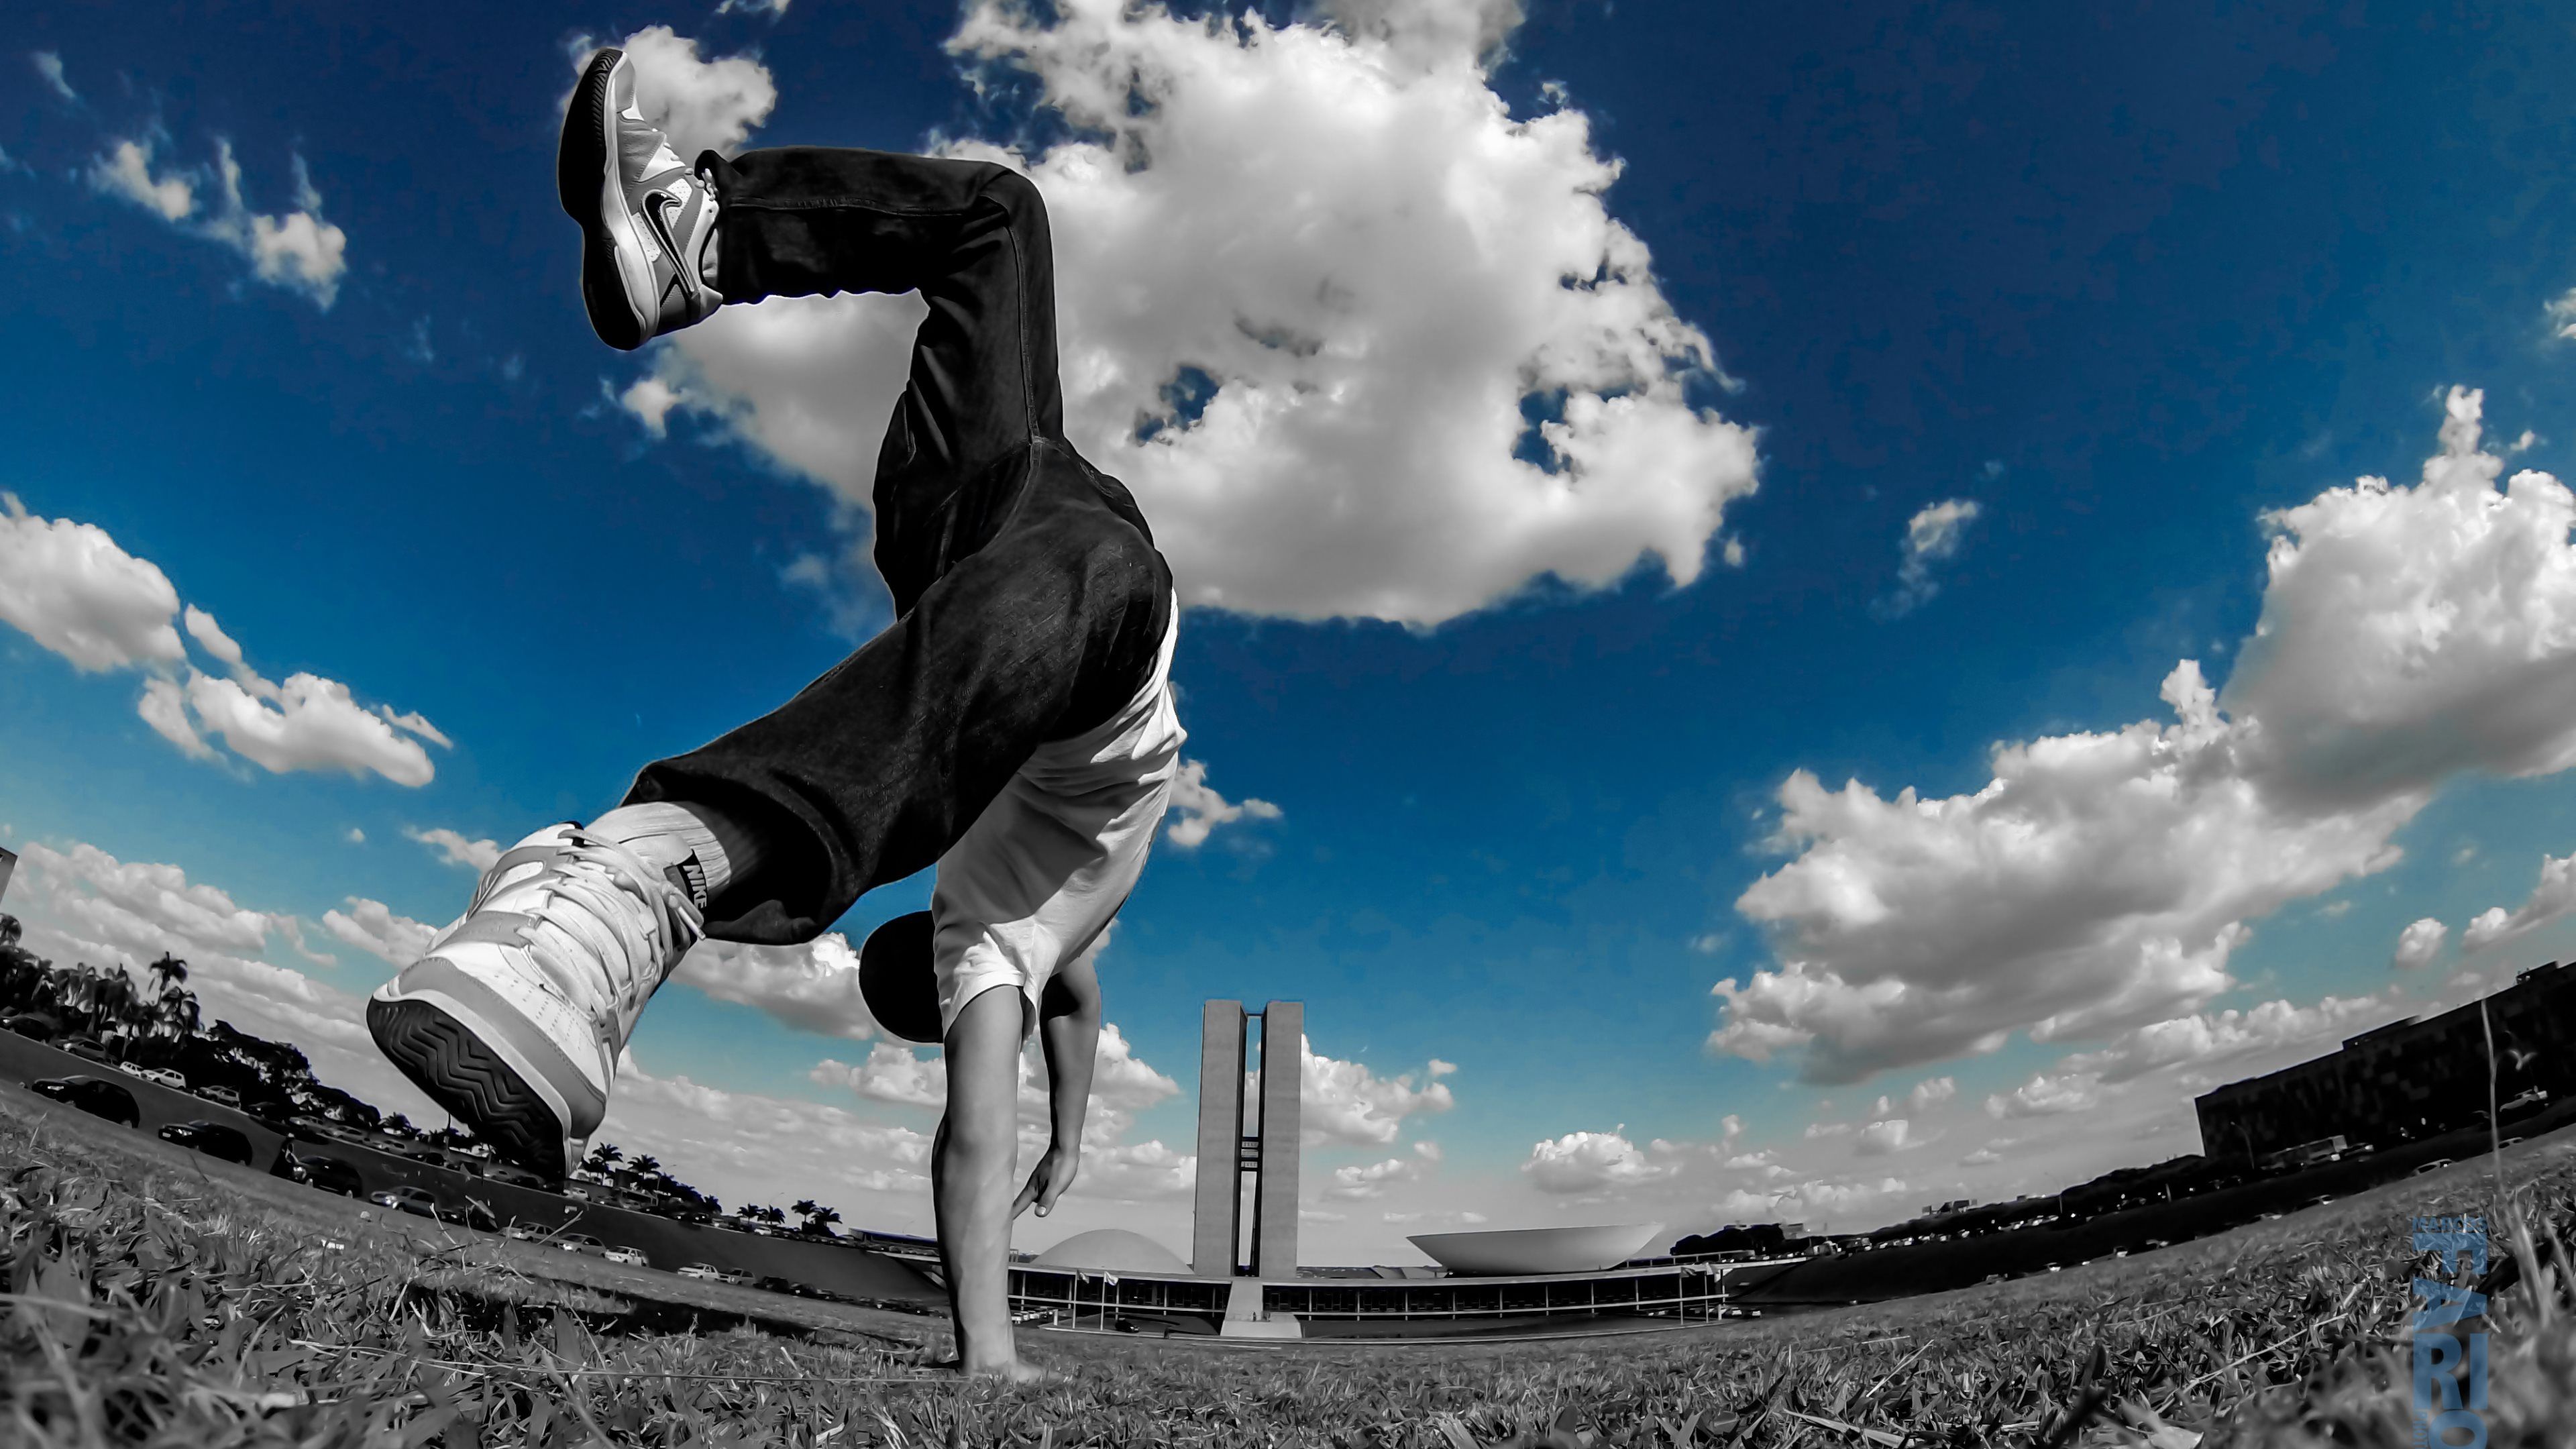 Backflip at Parkour Wallpapers HD Backgrounds